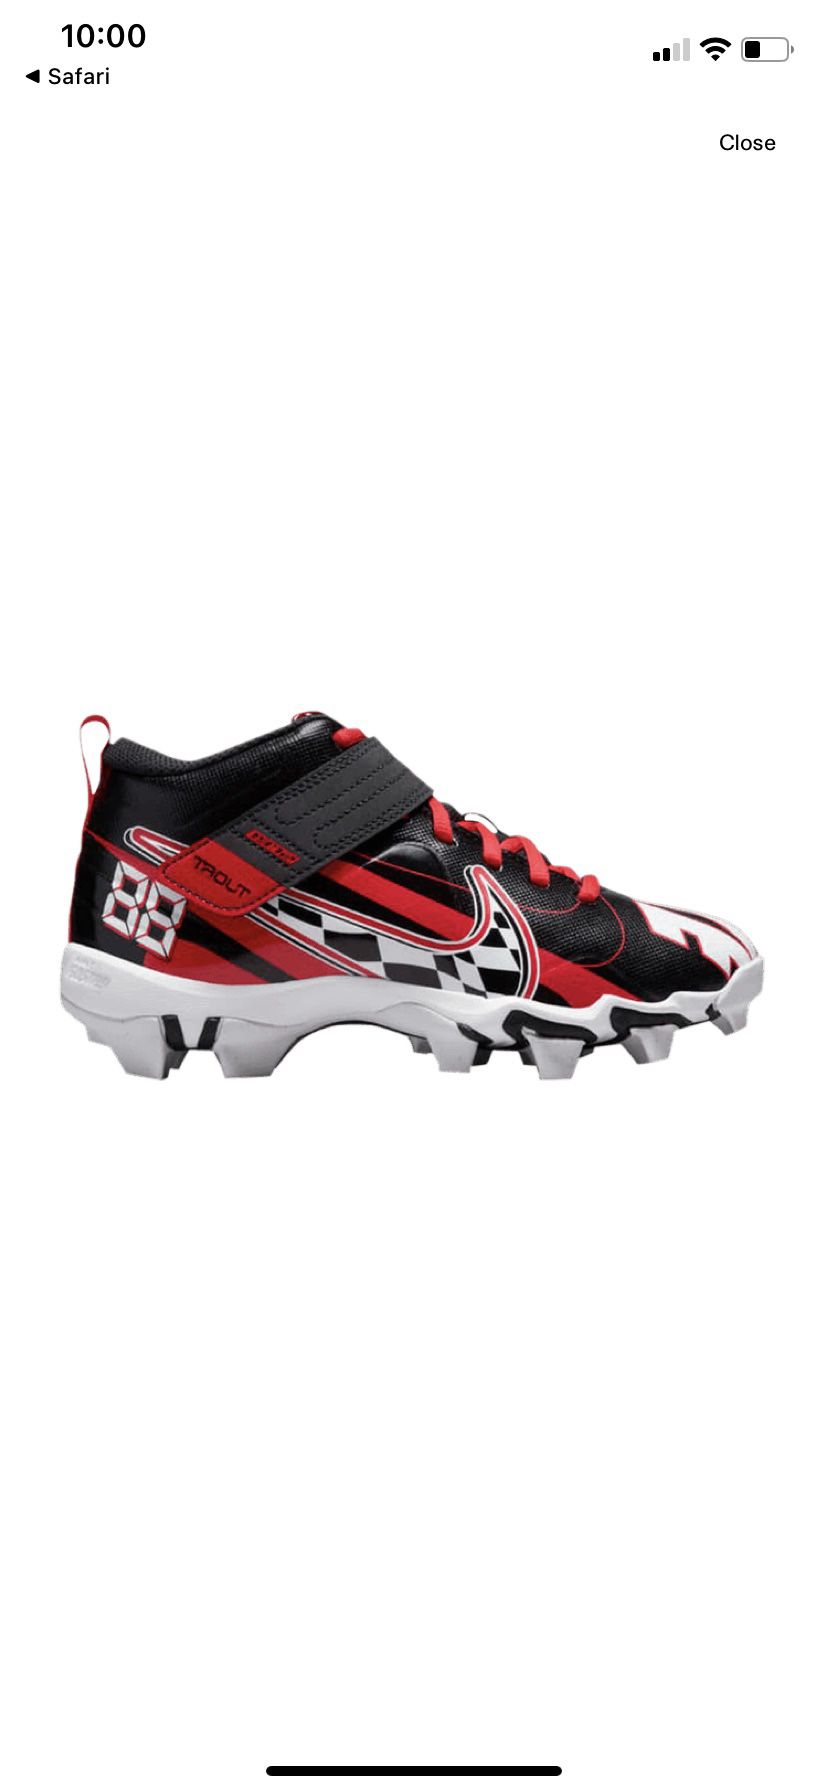 NIKE BOYS MIKE TROUT Cleats BNWT SIZE 5Y for Sale in Temecula, CA - OfferUp